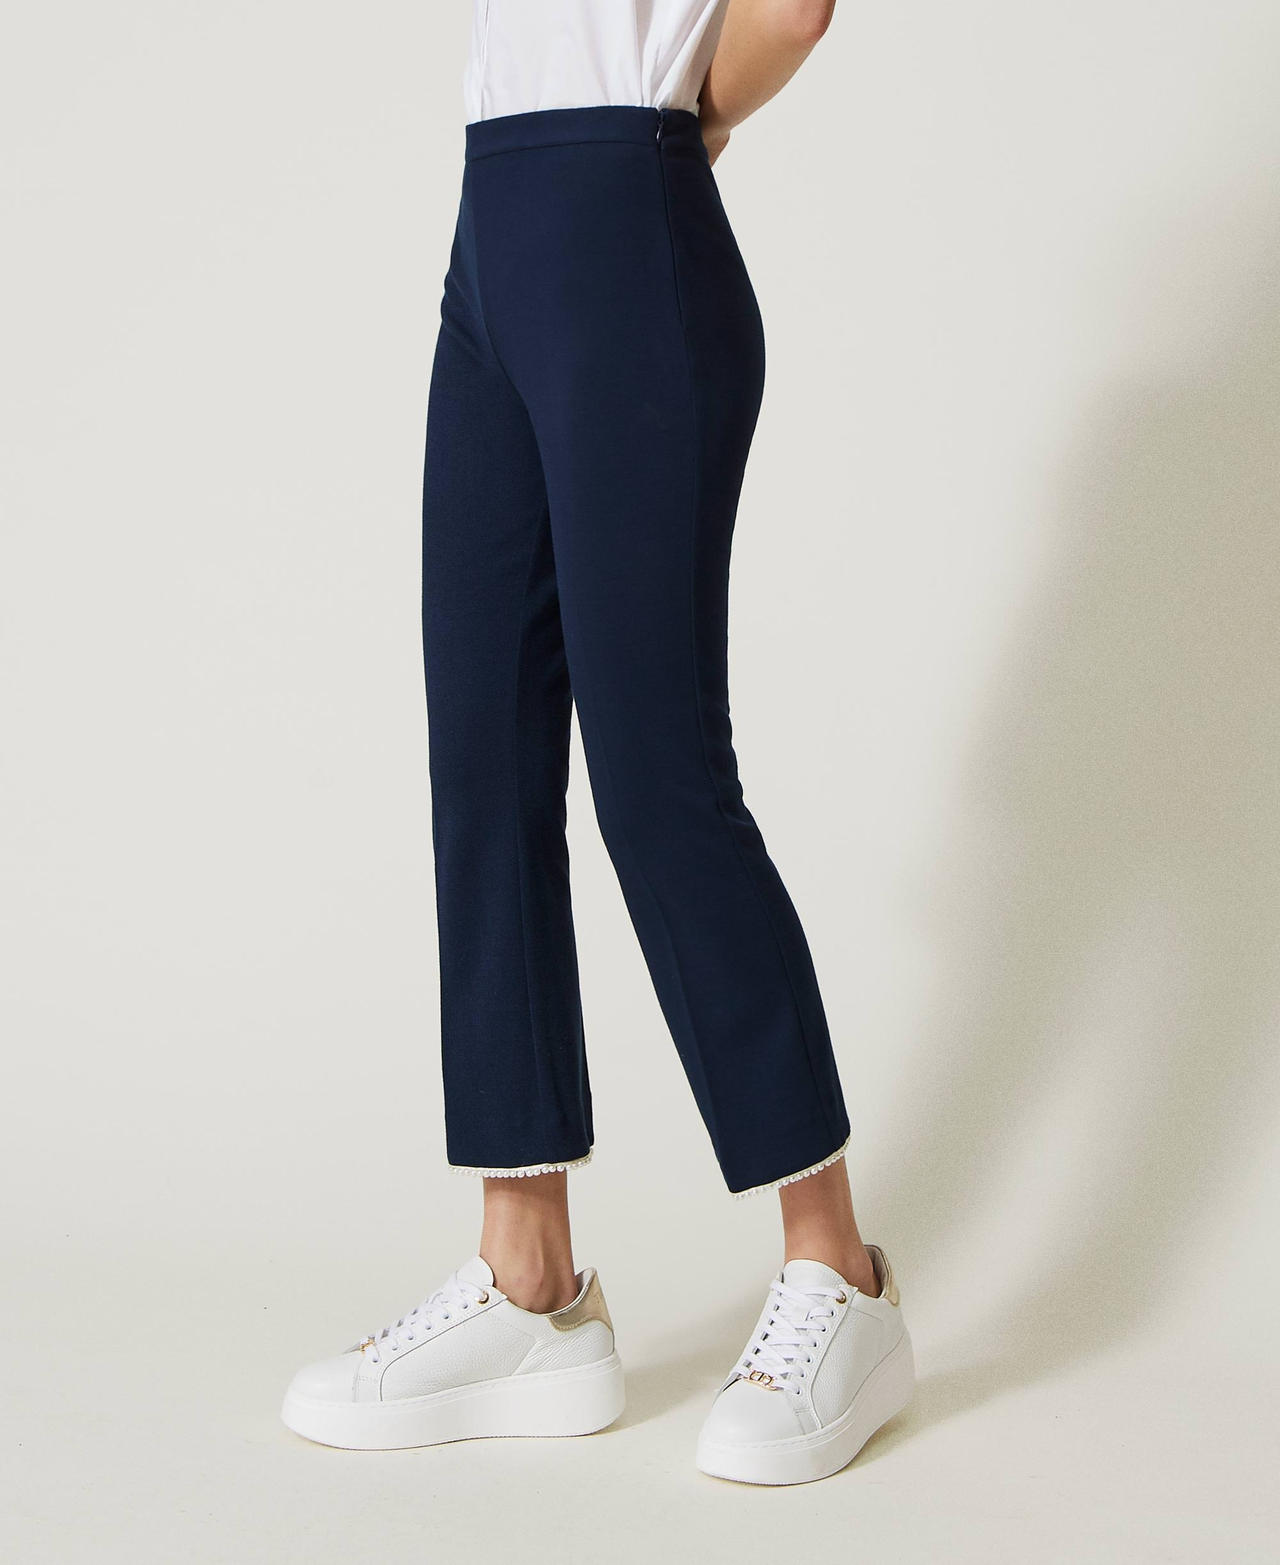 Cropped trousers with pearls Indigo Woman 231TP229E-02